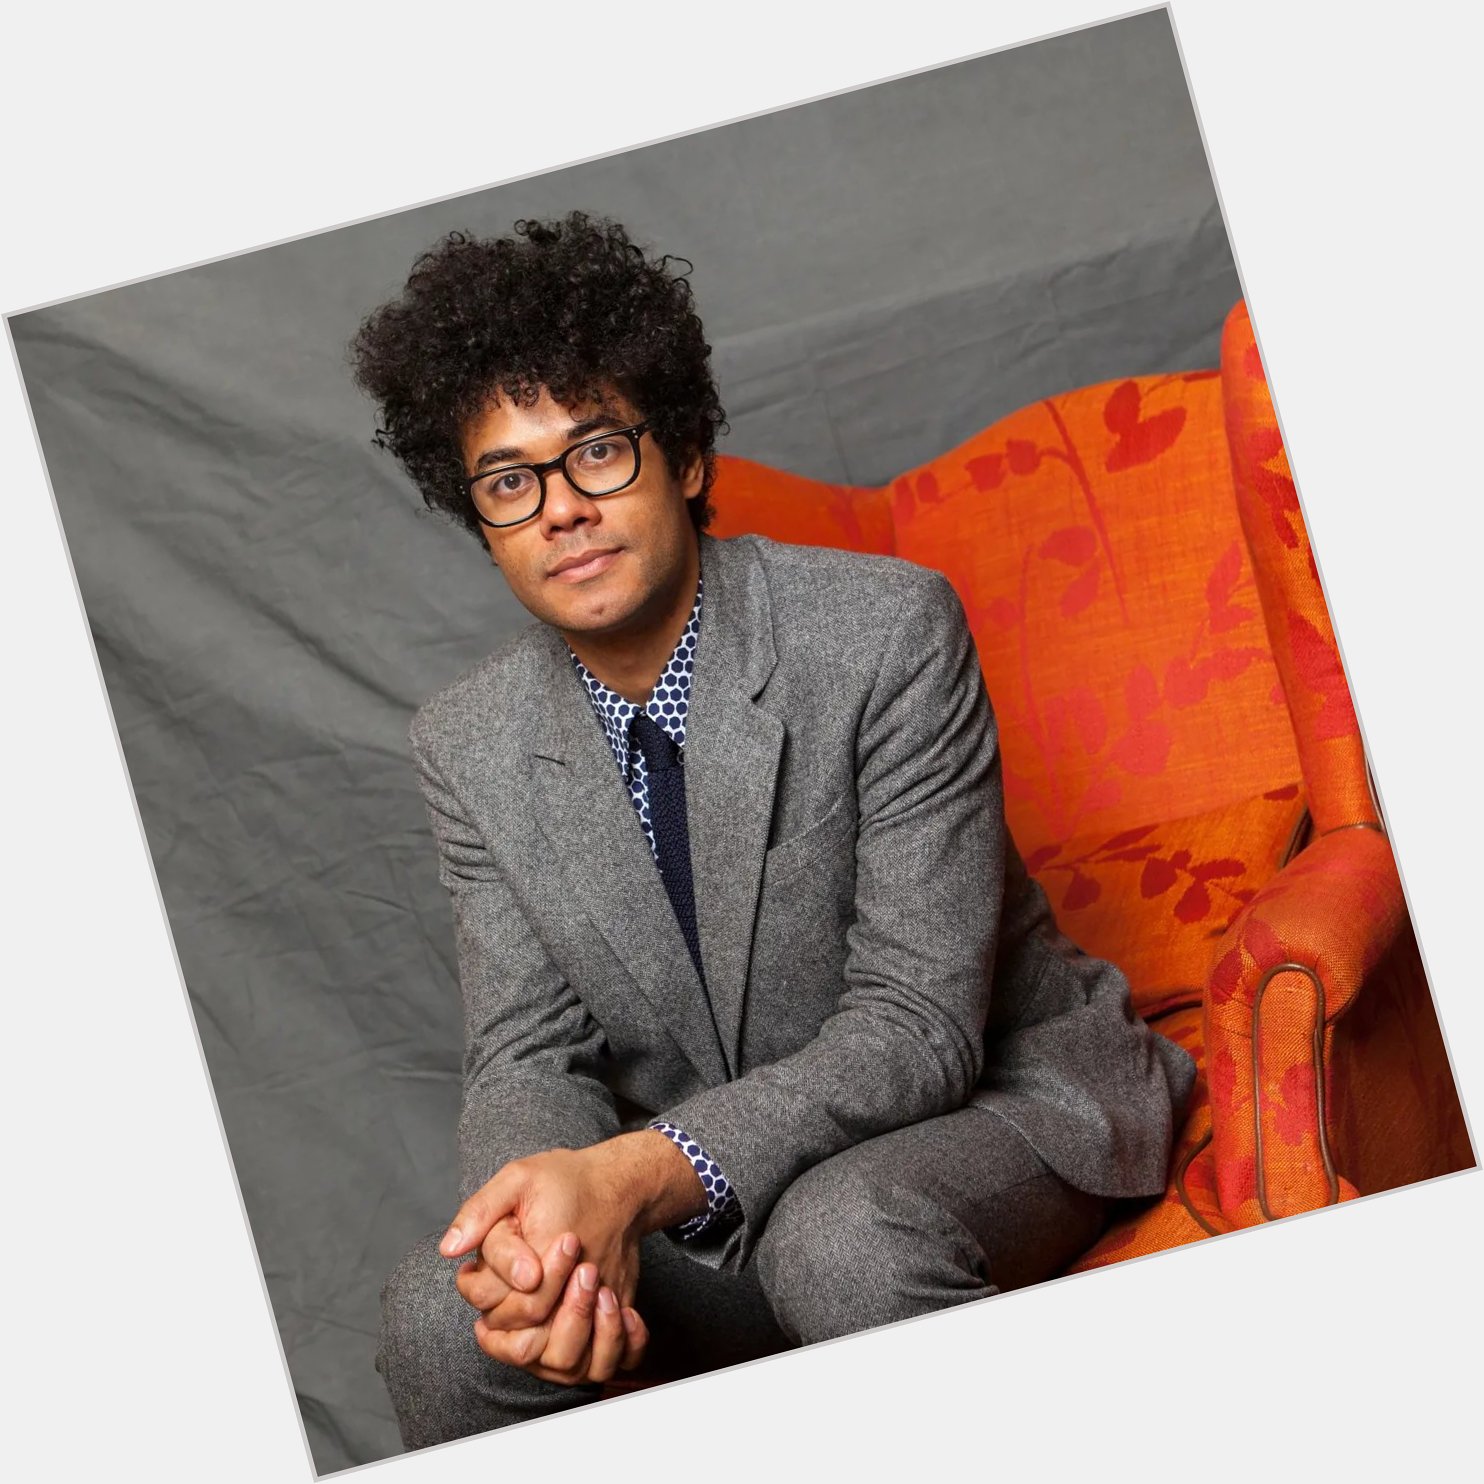 Happy birthday to Richard Ayoade, who voiced Q-90 in 